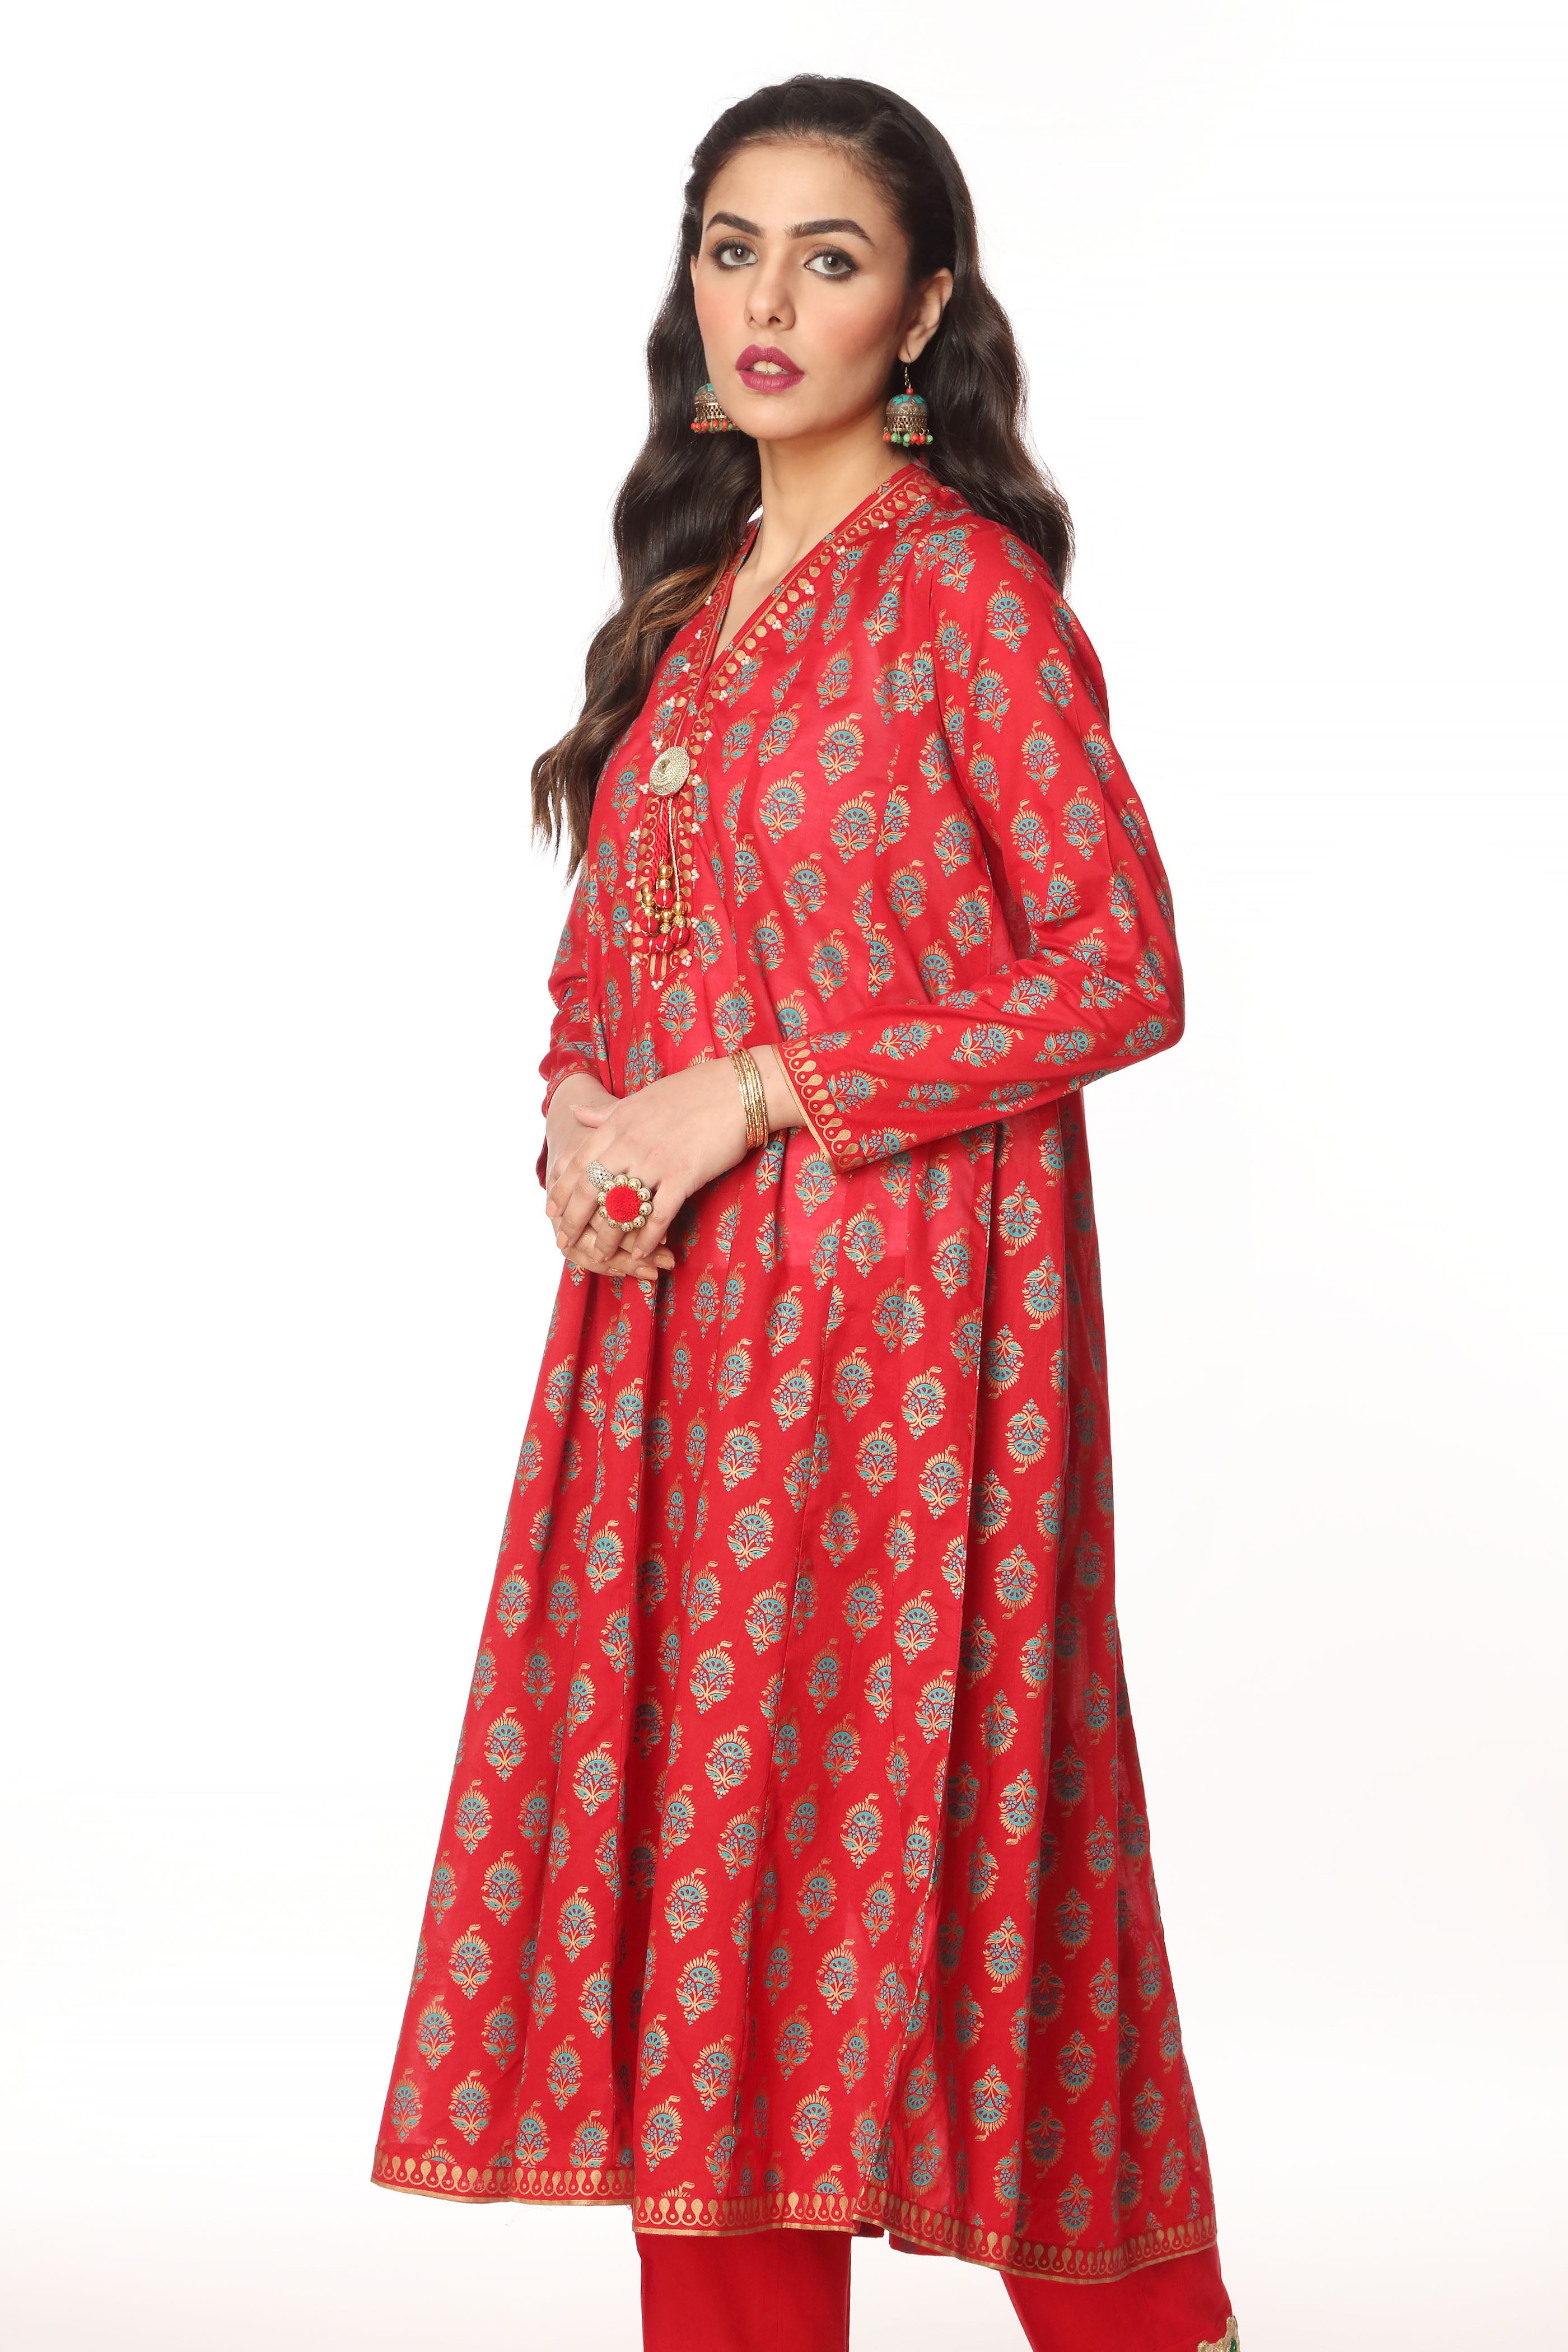 Discover Timeless Style: Peacock Frock Frock in Red Printed Lawn ...